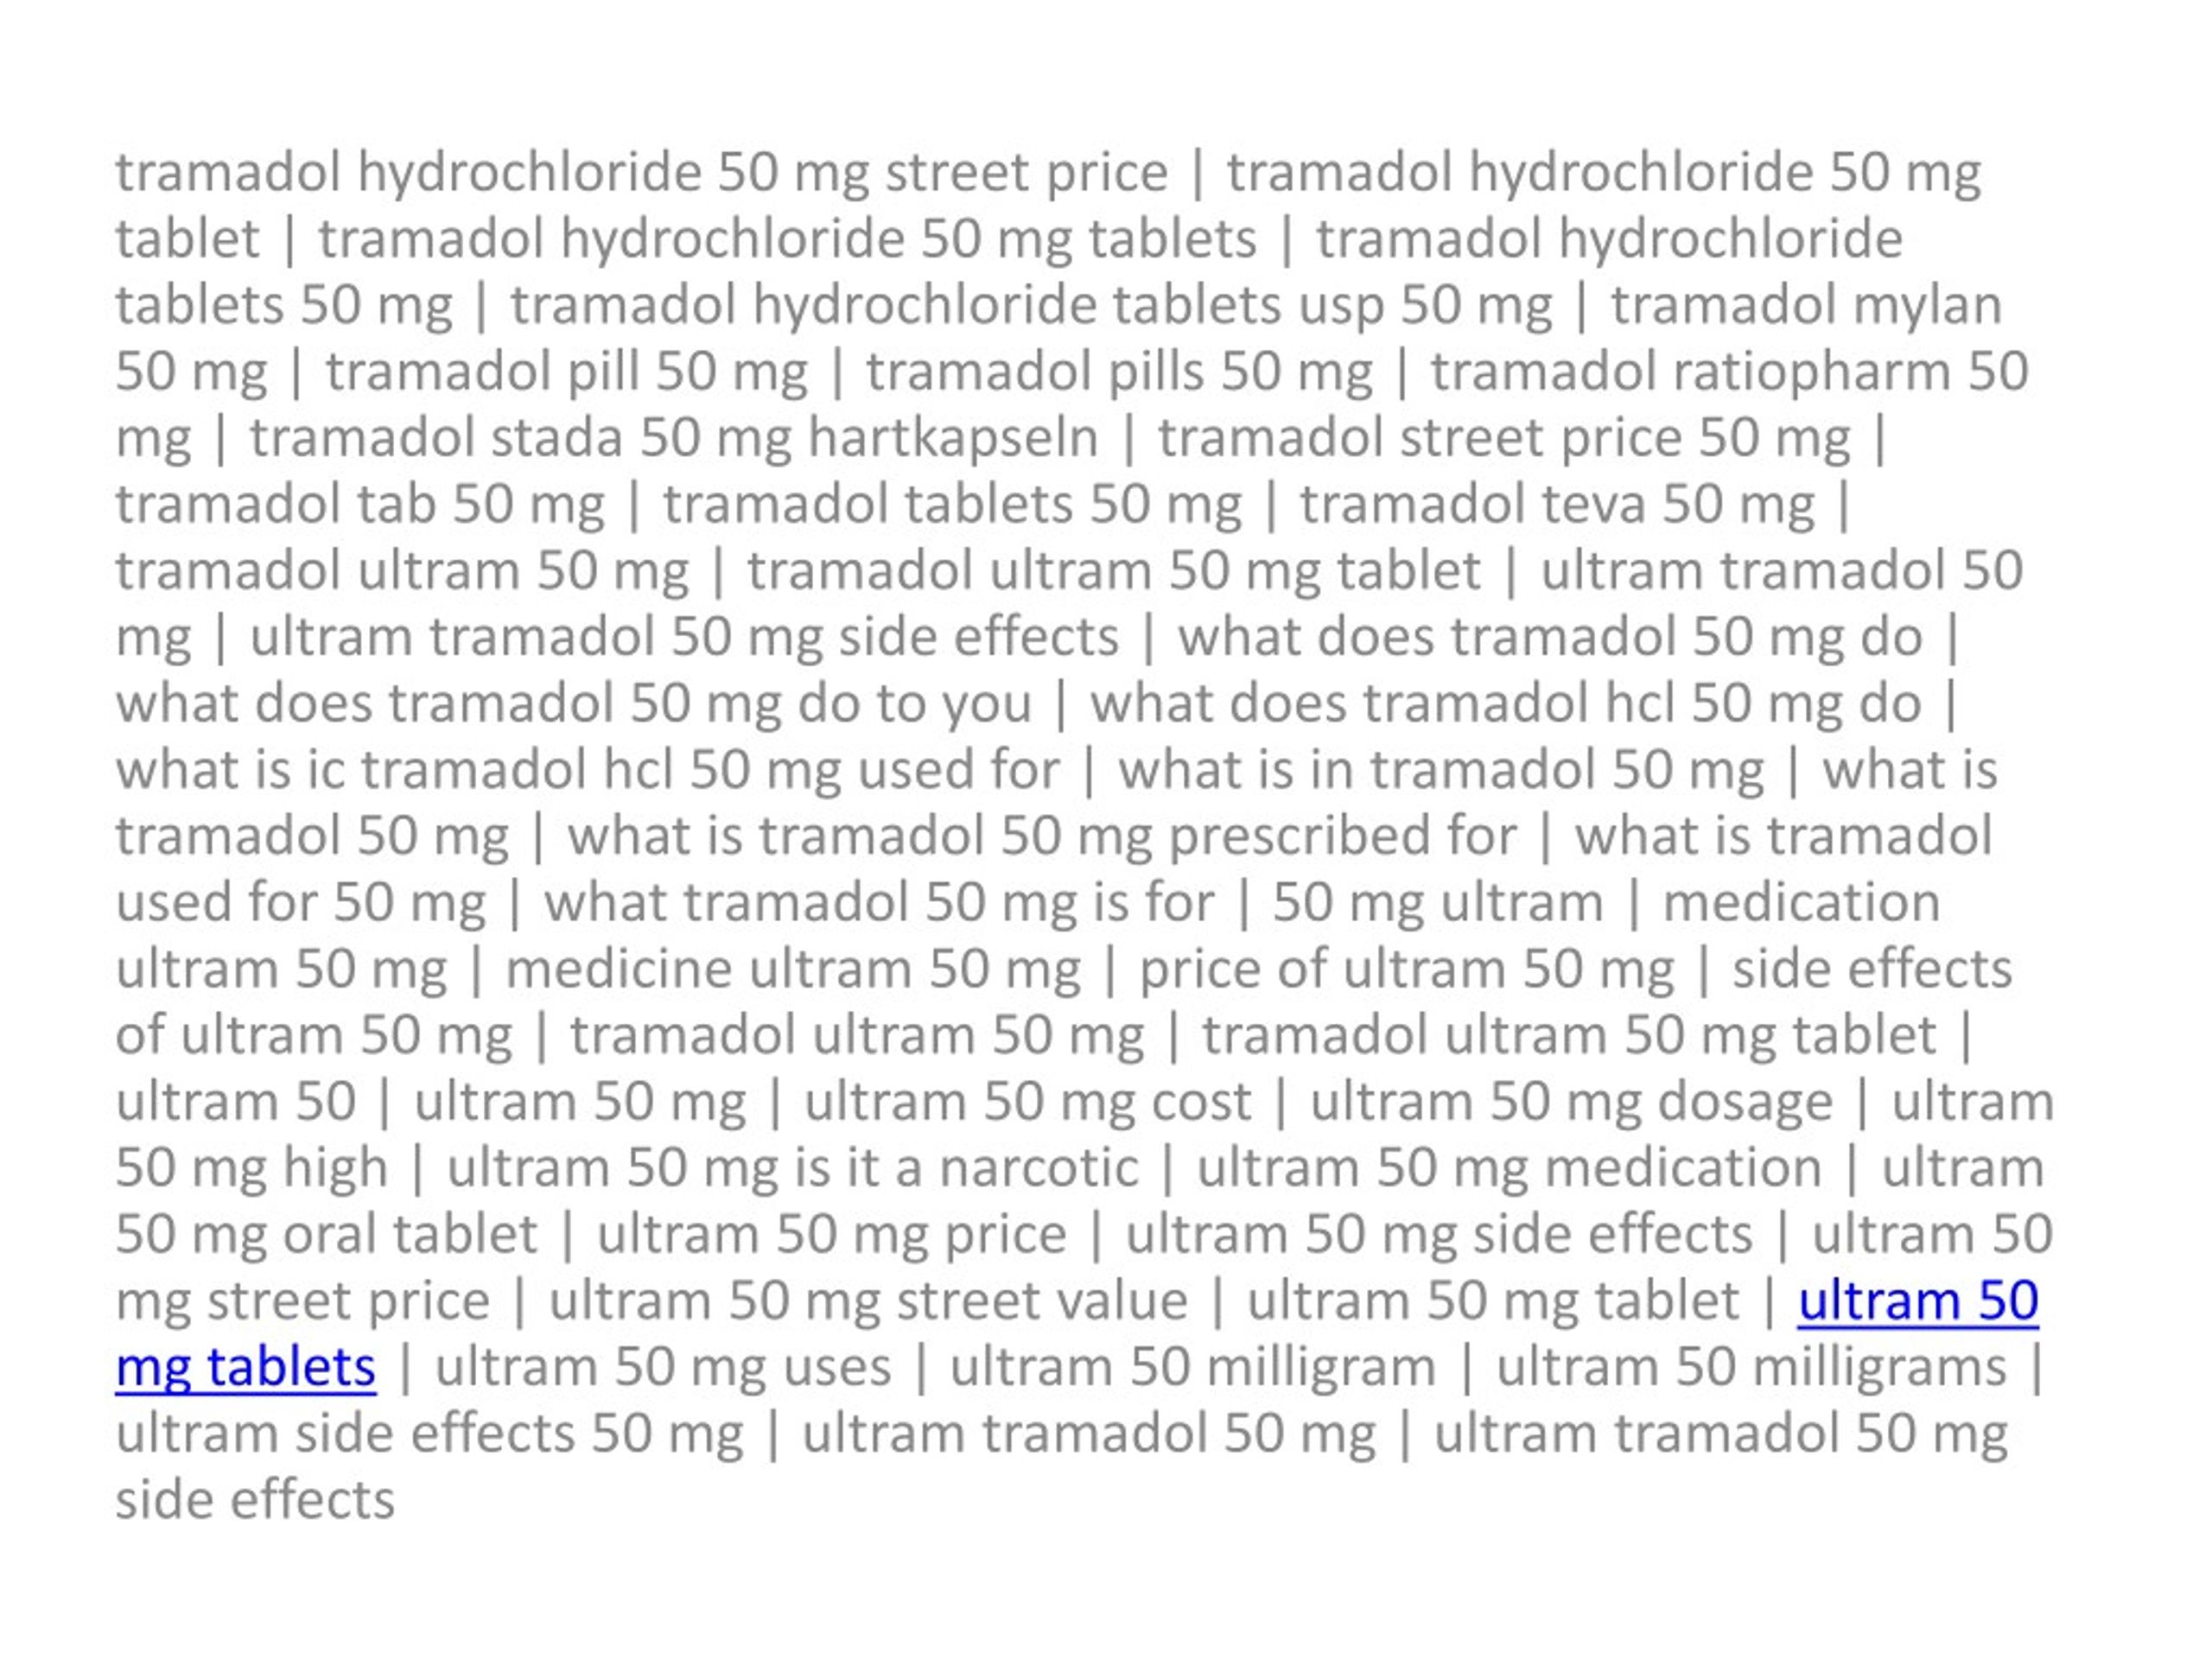 Ppt Ultram Tramadol 50mg Price Uses And Side Effects Powerpoint Presentation Id